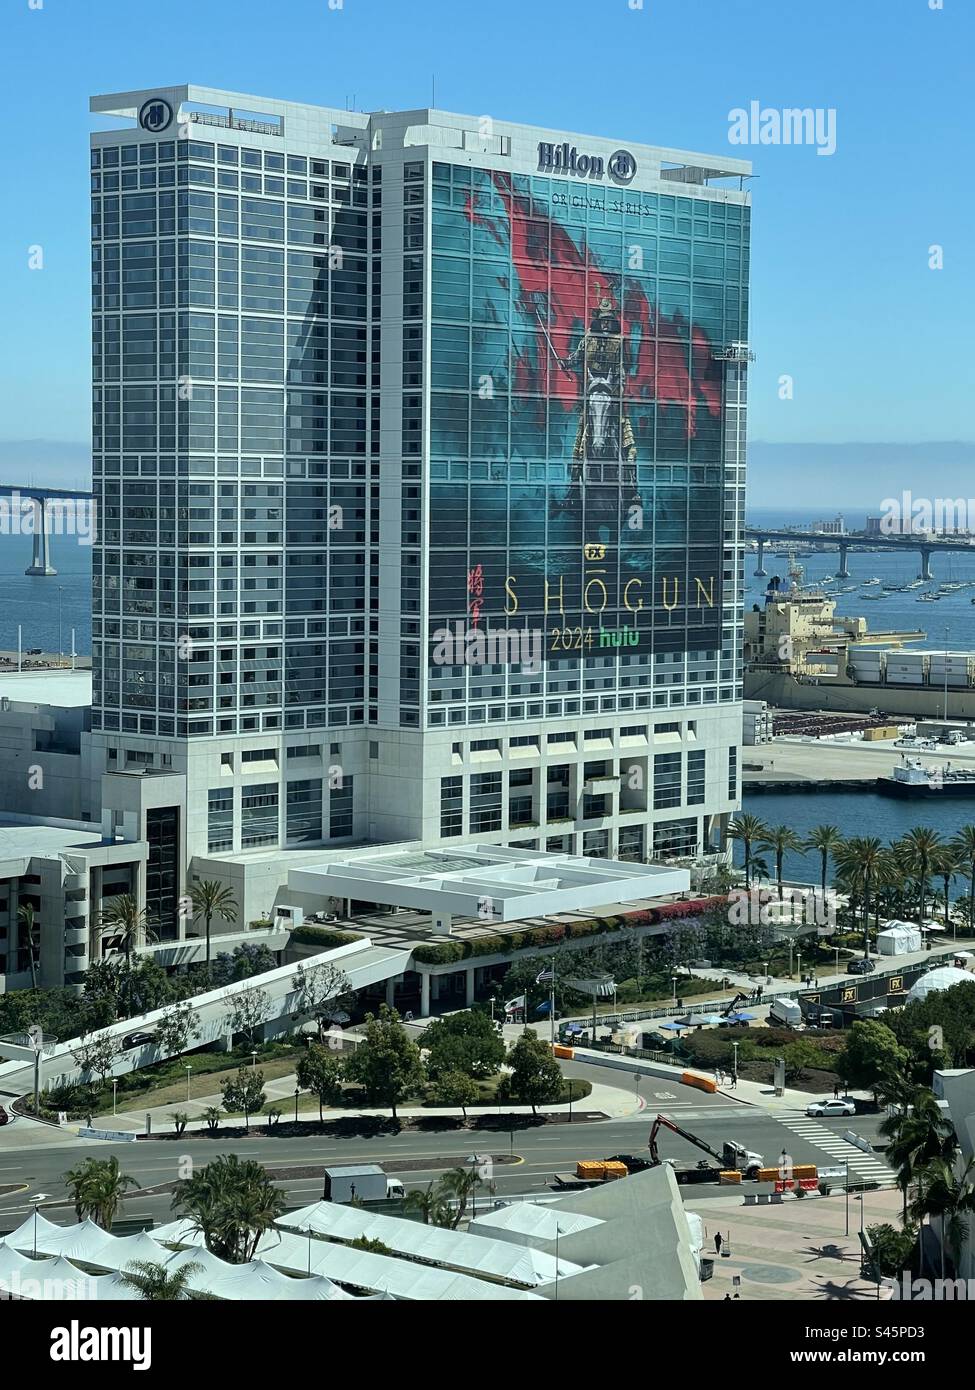 Hilton Bayfront building wrap of Hulu’s series Shogun during Comic Con 2023 held in San Diego, CA Stock Photo